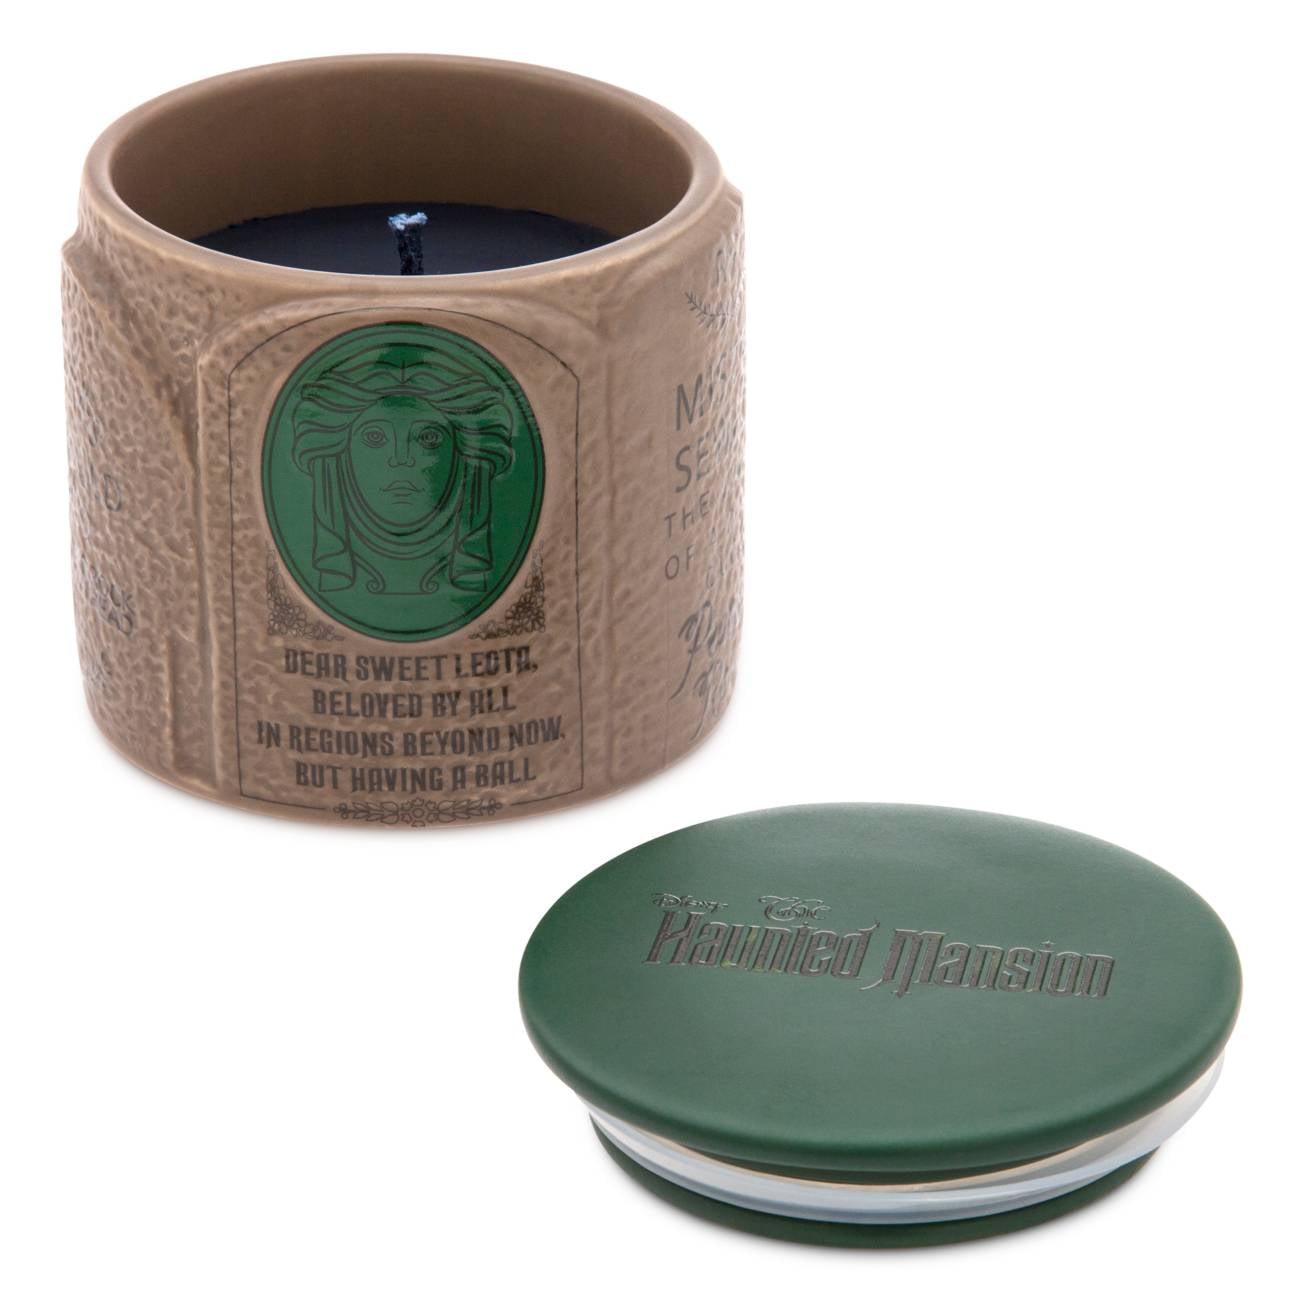 Something Spooky: The Haunted Mansion Candle With Lid